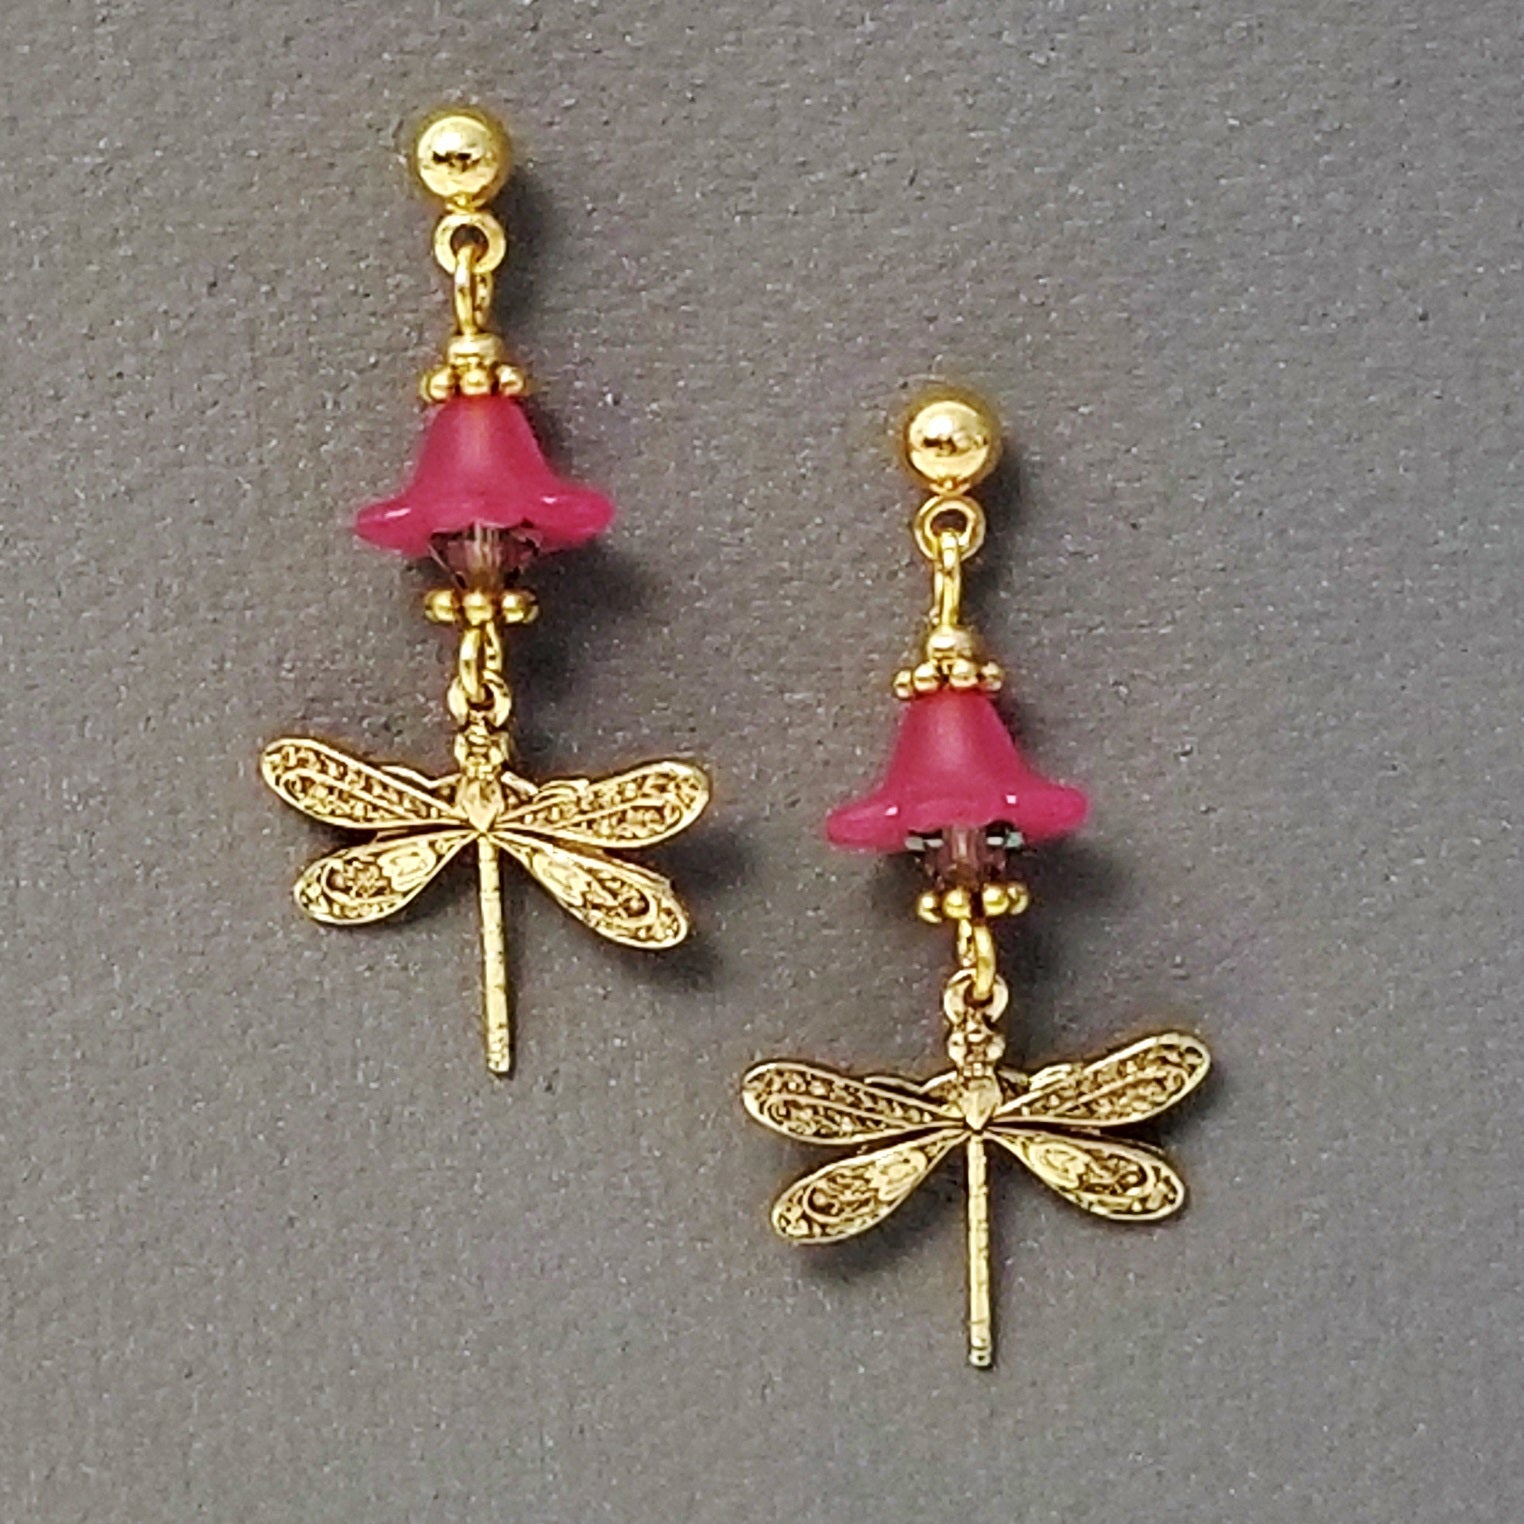 Adult Jewelry Making Kit - Dragonfly Designs